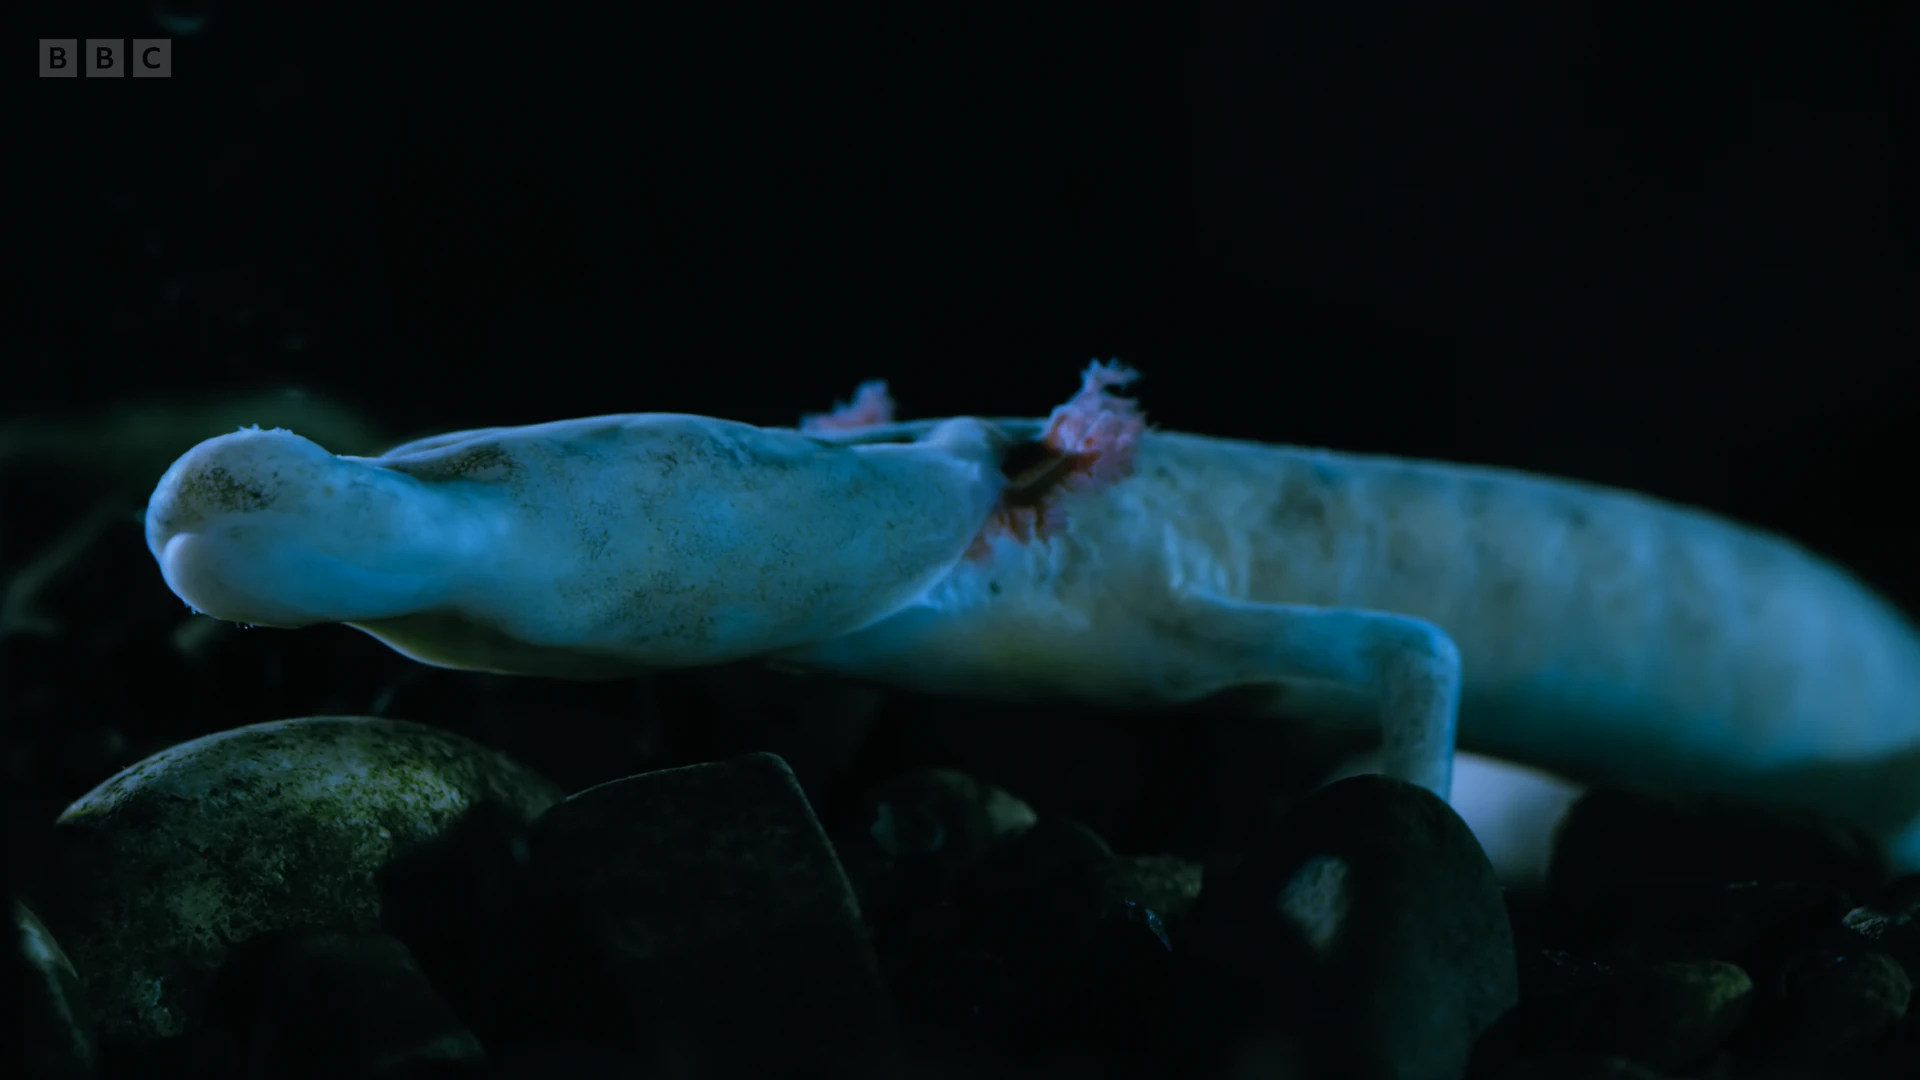 Olm (Proteus anguinus anguinus) as shown in Seven Worlds, One Planet - Europe